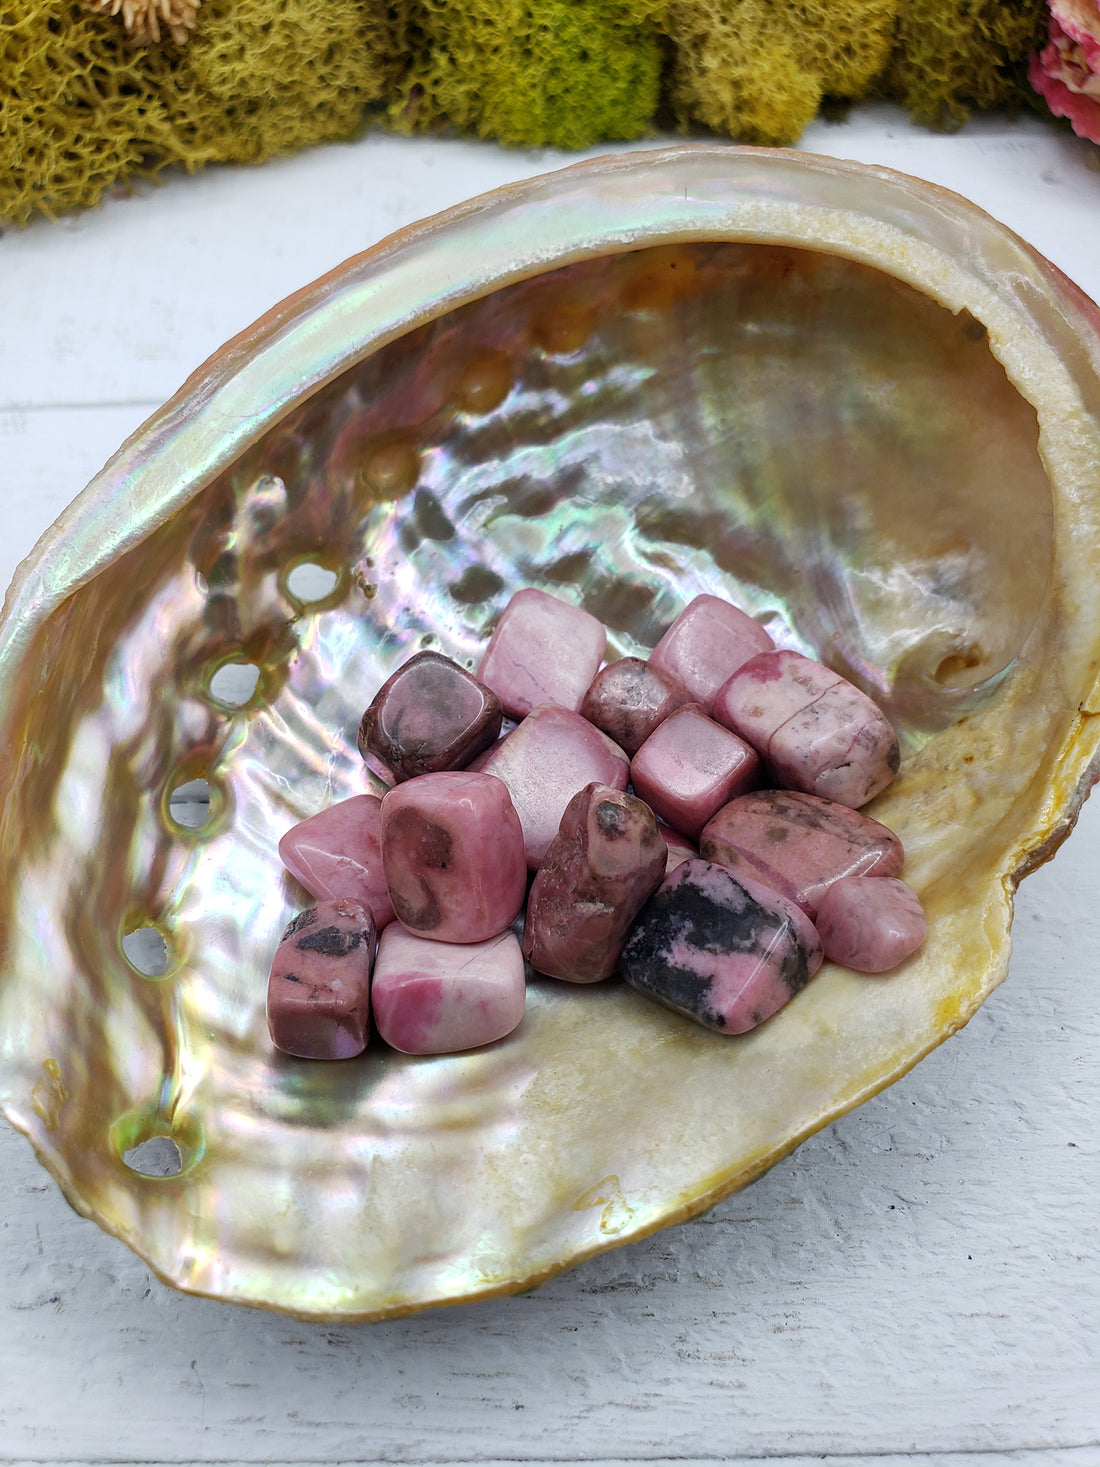 Abalone shell with one ounce of rhodonite pebble stones